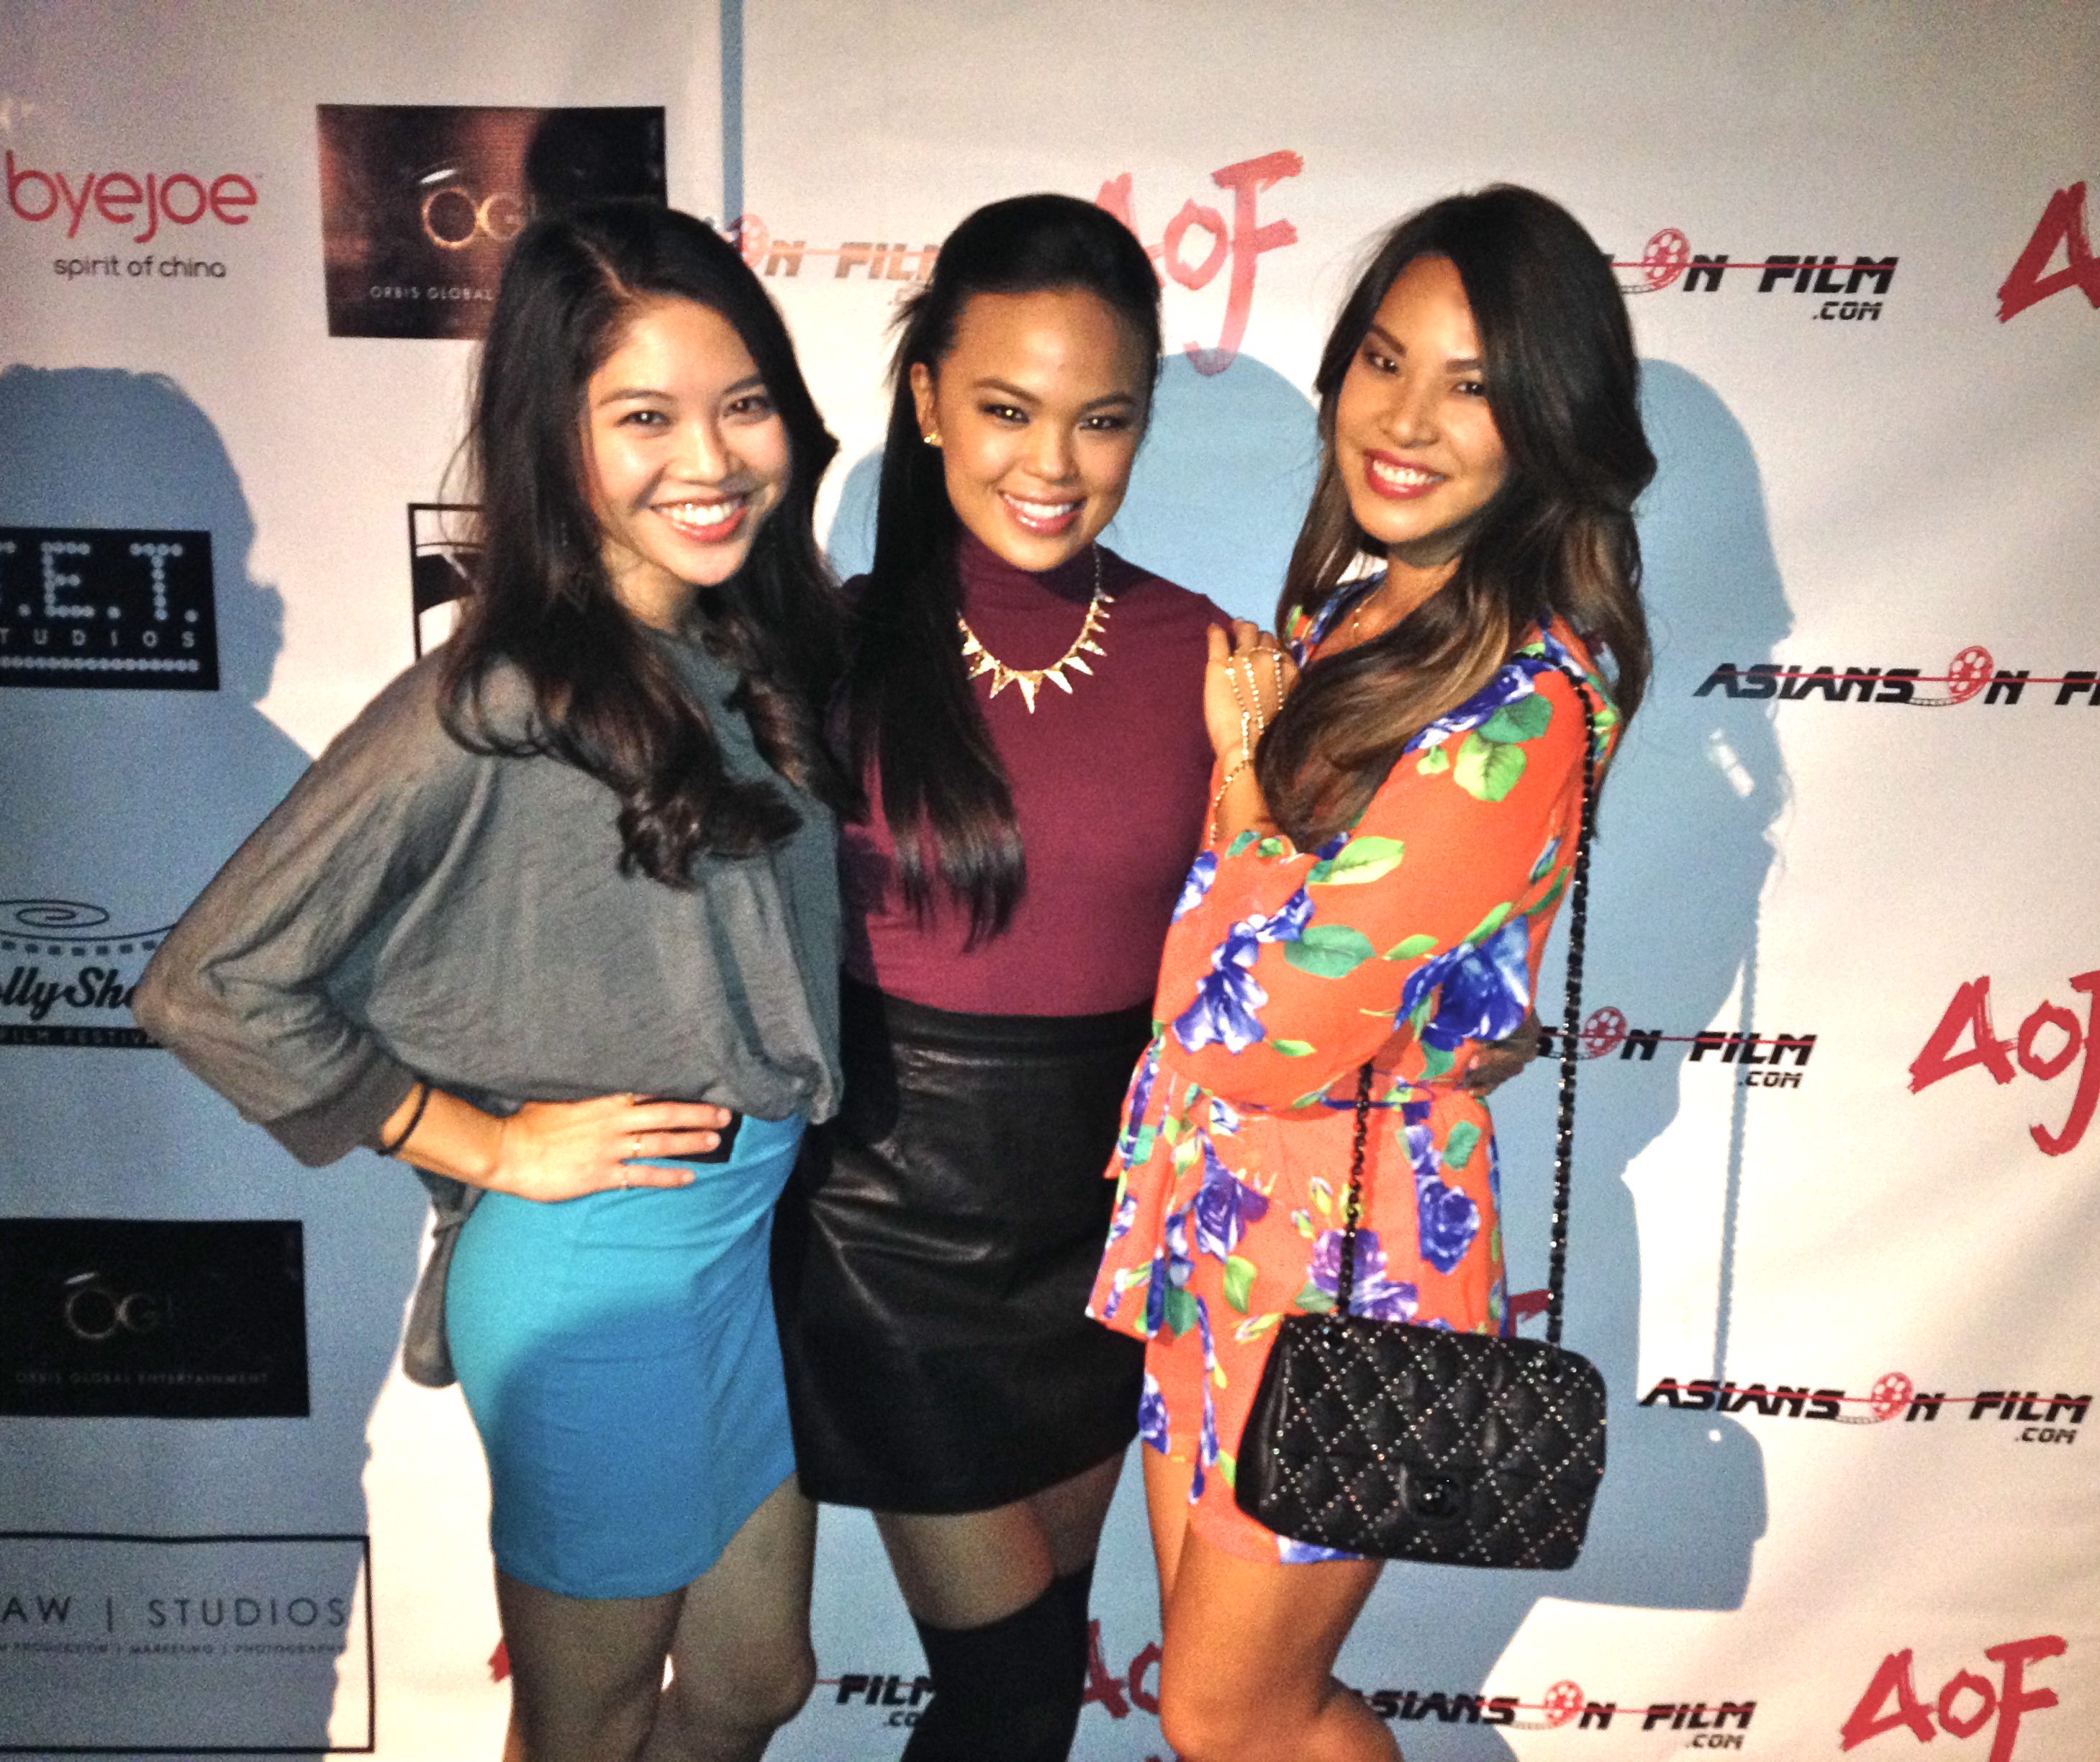 Jessica with friends, Nikki Soohoo and Lauren Gaw, at 'Asians on Film' Mixer